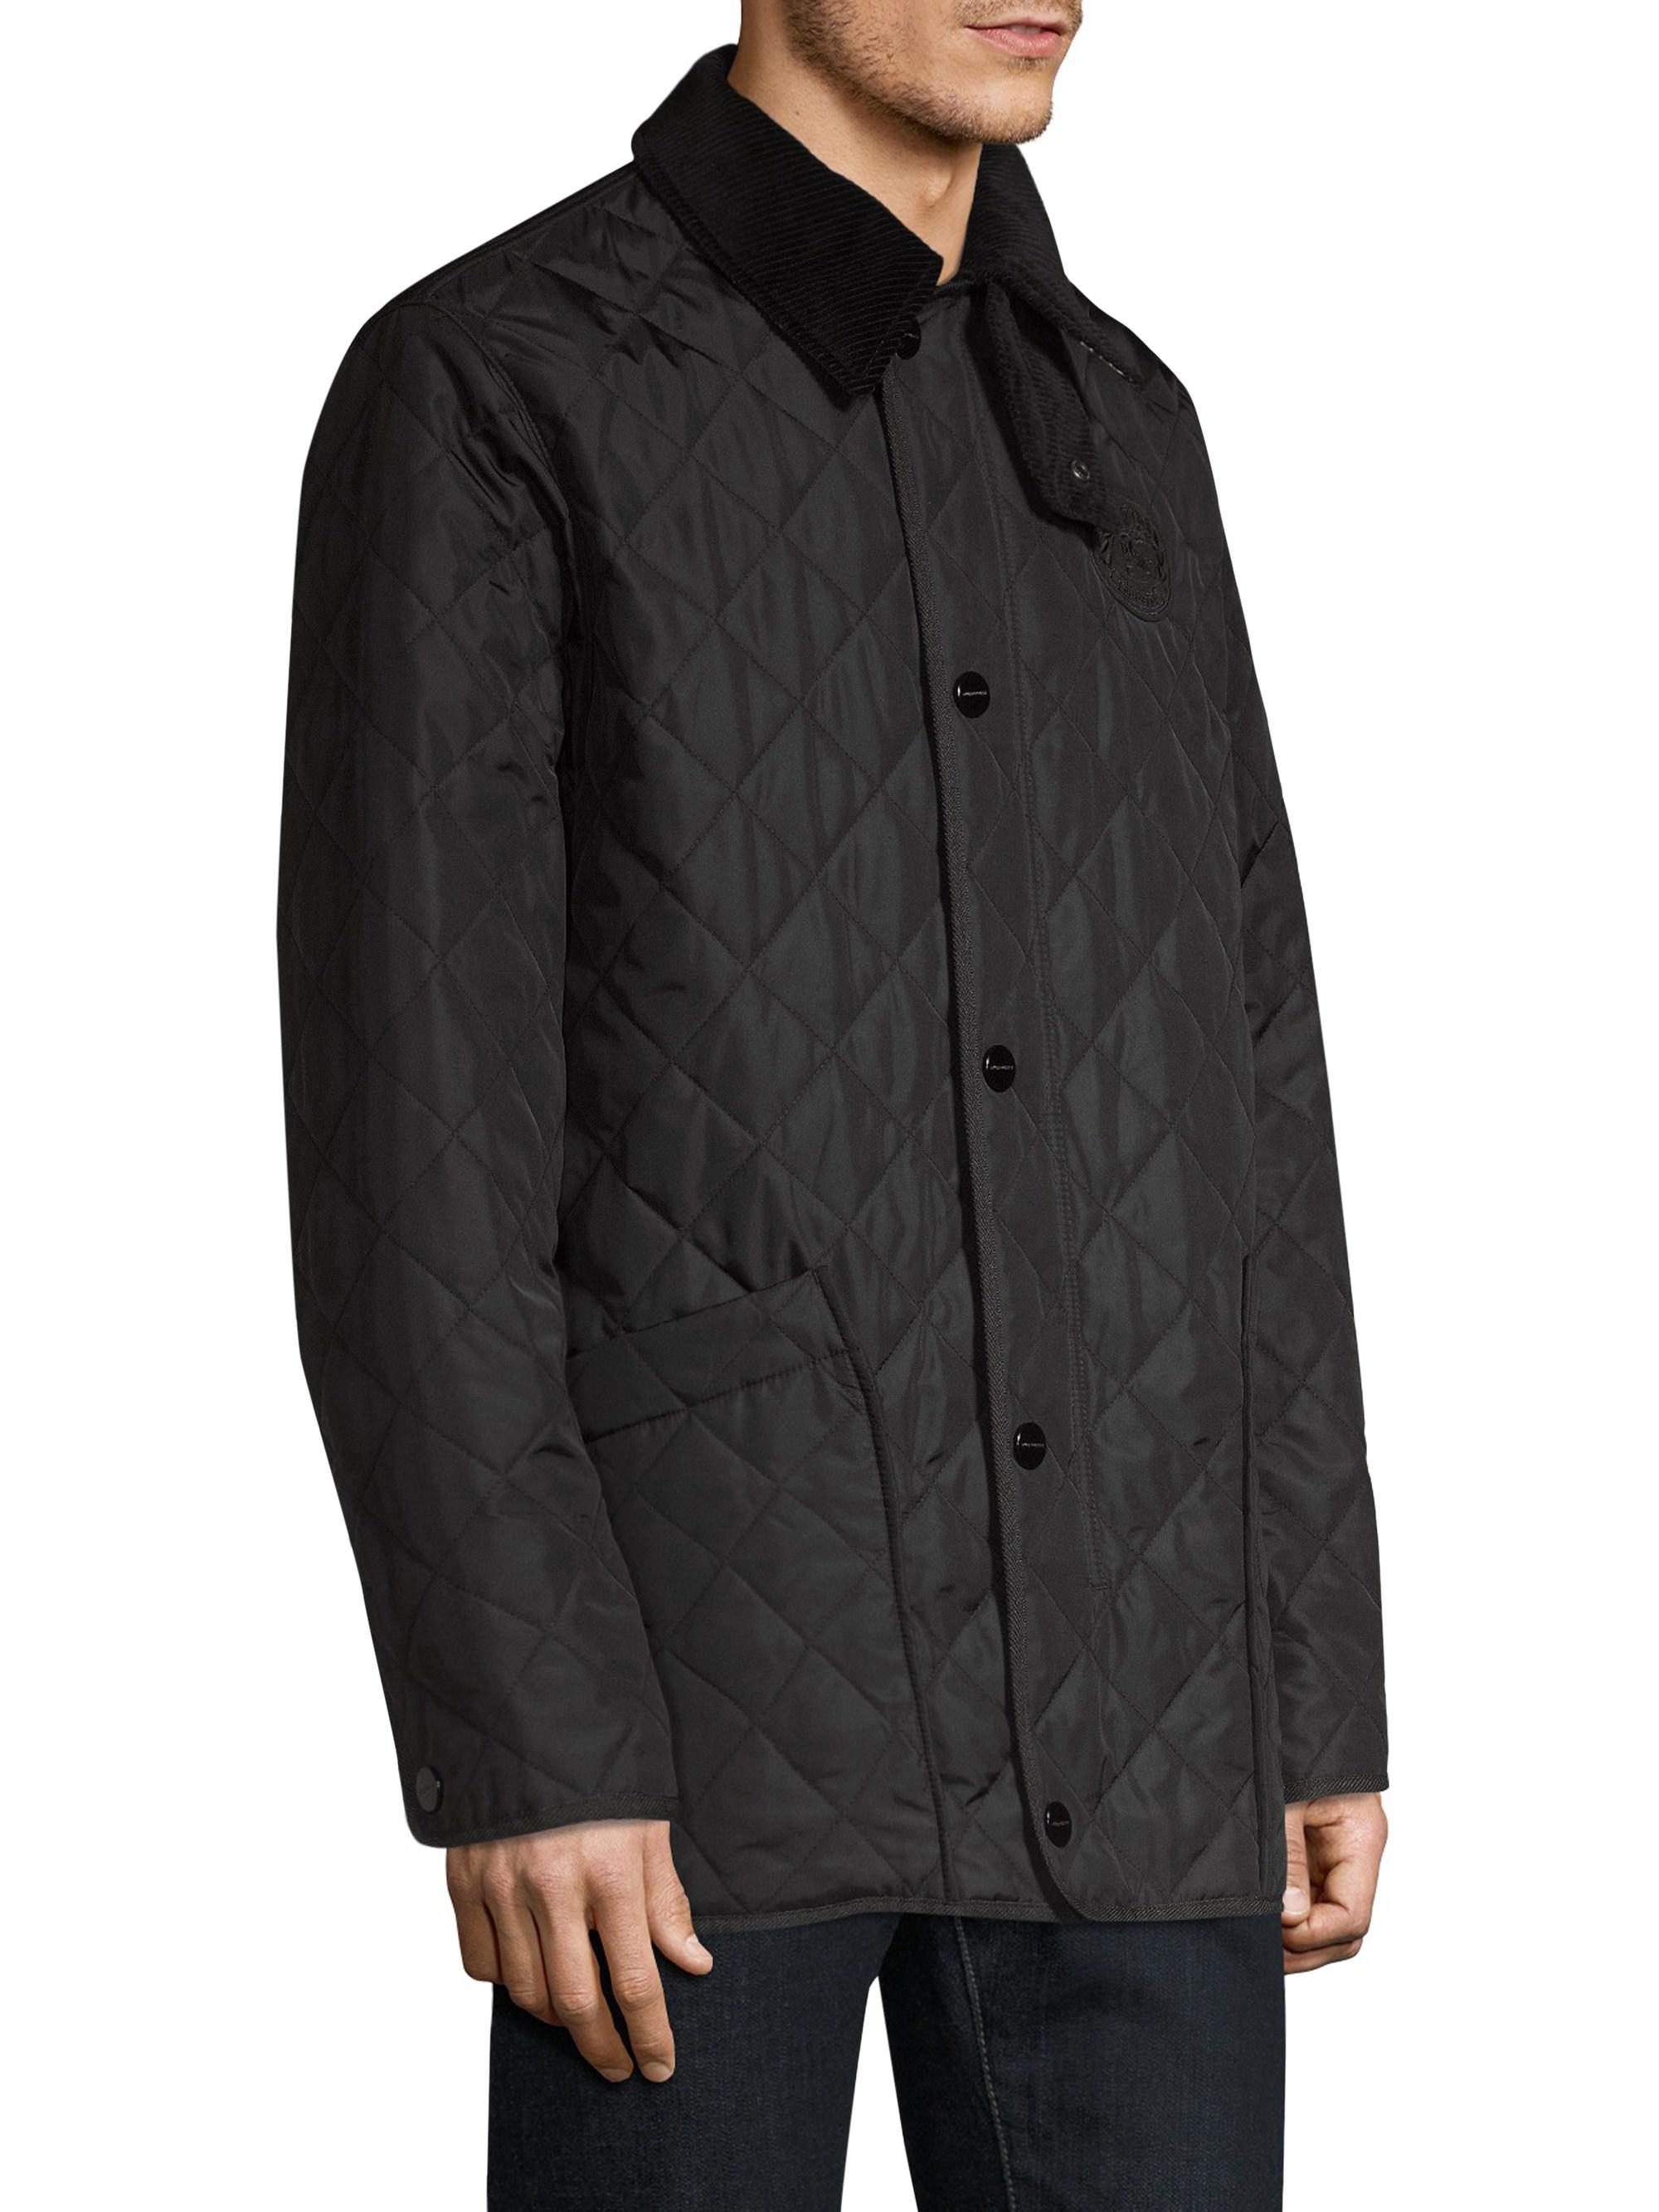 Burberry Cotswold Quilted Barn Jacket in Black for Men - Lyst